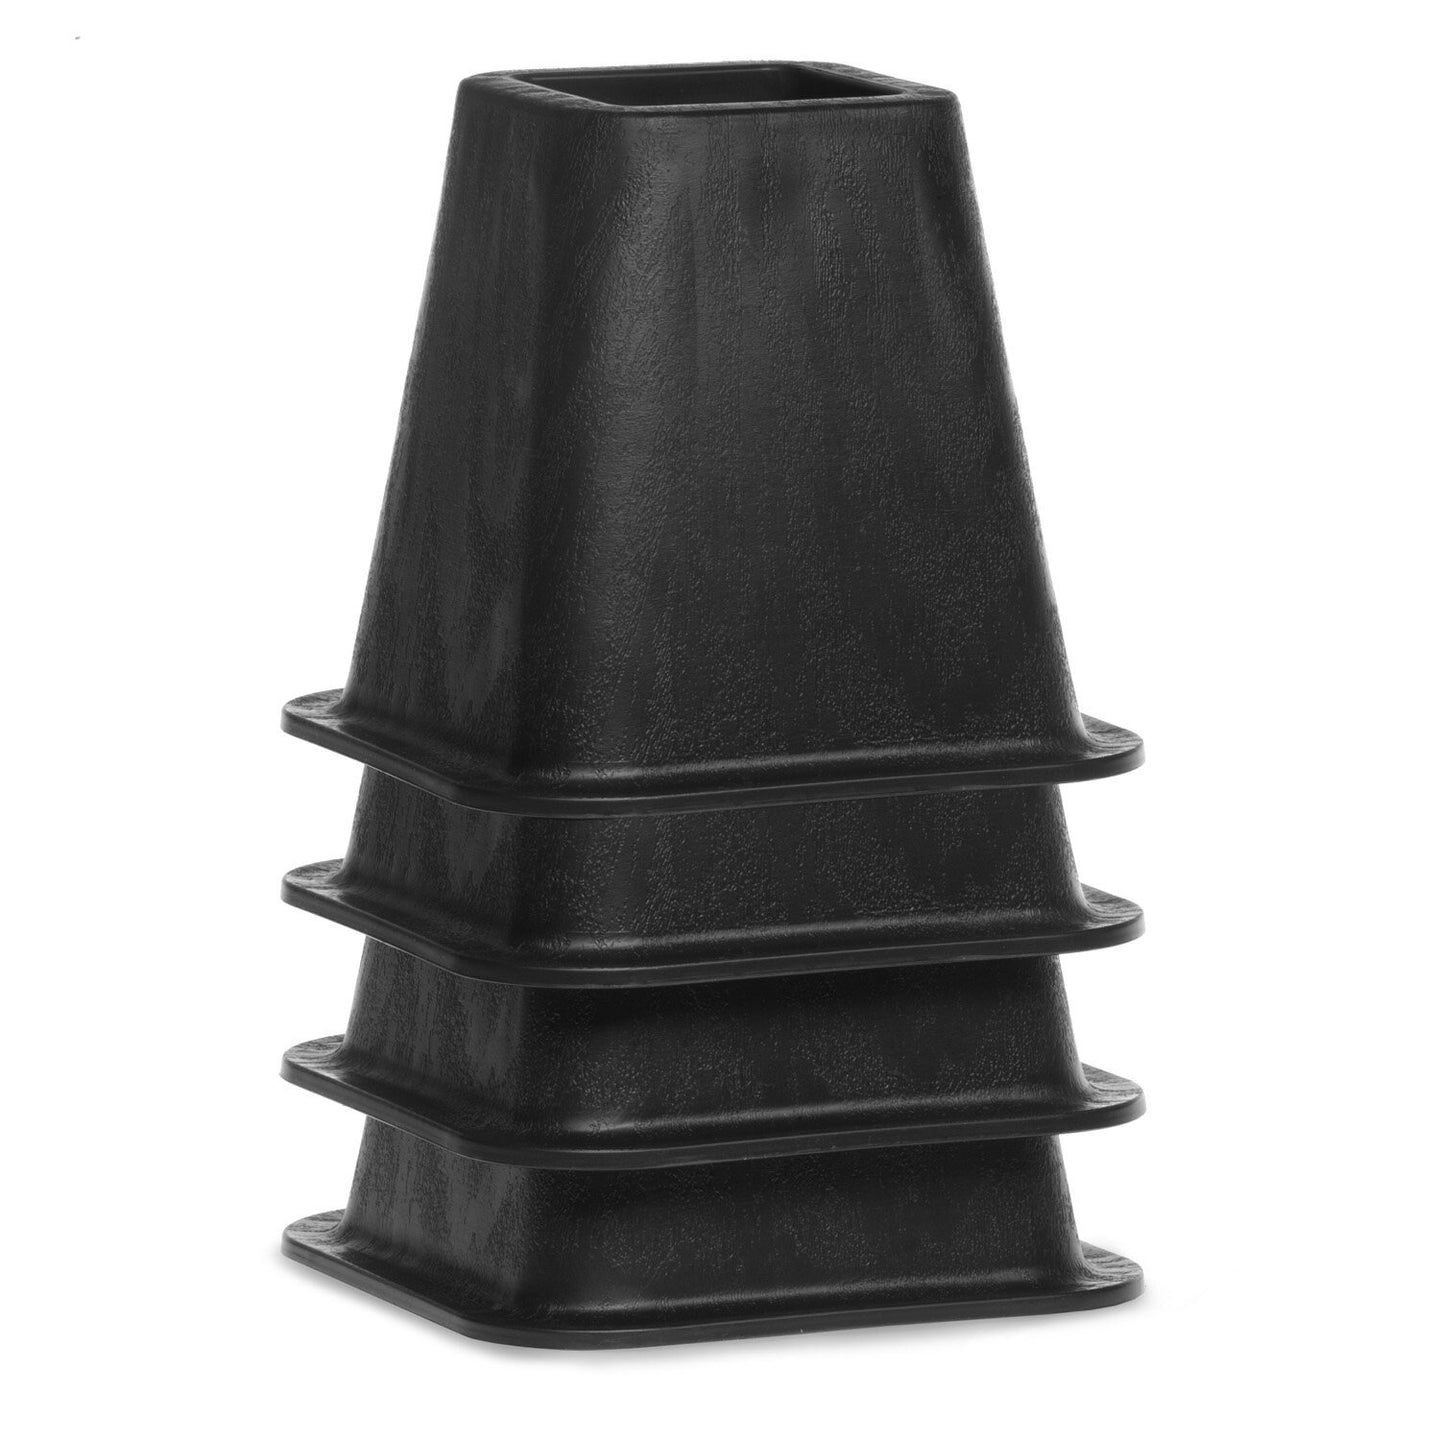 STRUCTURES 6 Inch Heavy-Duty Bed Risers - Set of 4 - Black(1251)